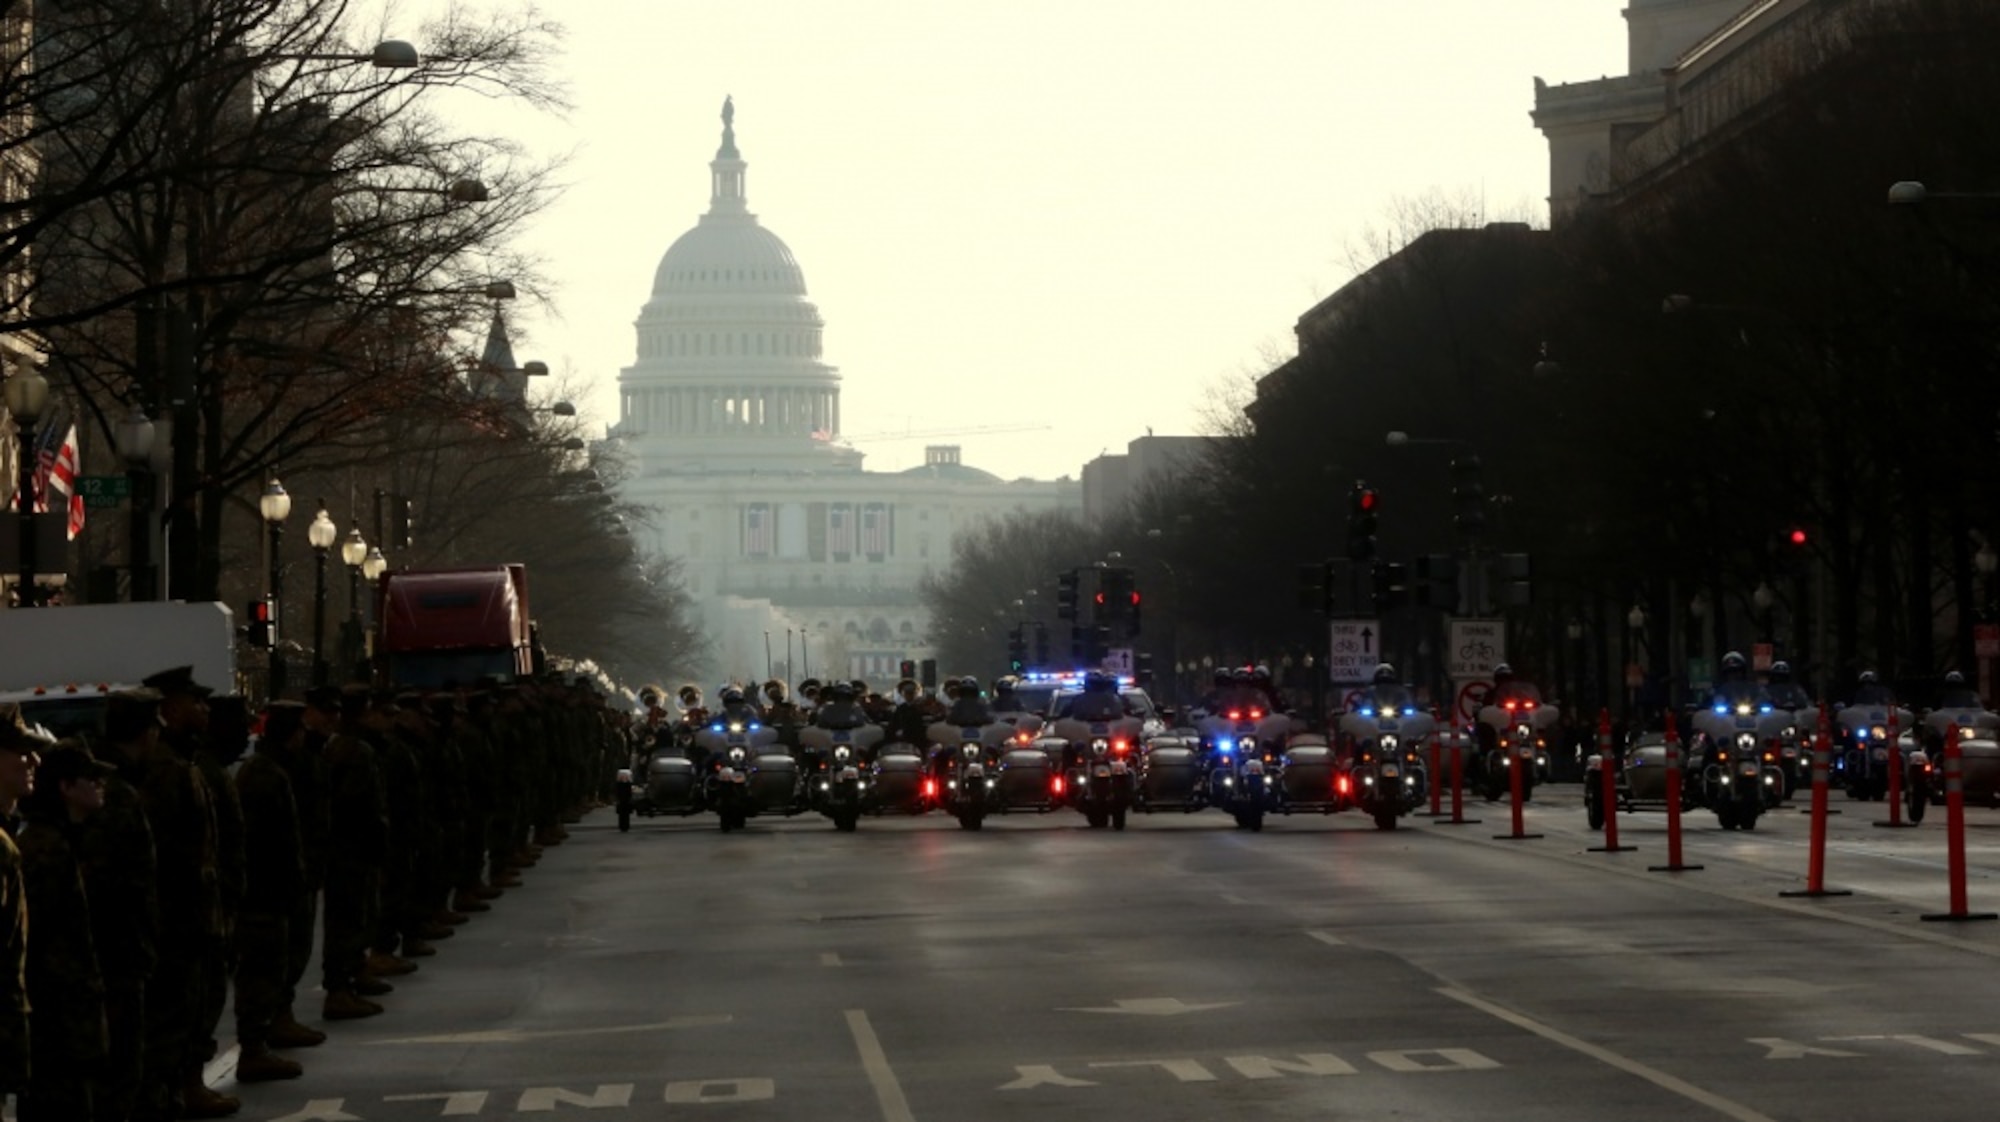 Members of the Police Task Force escort members in the rehearsal parade on Pennsylvania Avenue in Washington, D.C., Jan. 15, 2017. More than 5,000 military members from across all branches of the armed forces of the United States, including Reserve and National Guard components, provided ceremonial support and Defense Support of Civil Authorities during the inaugural period. (DoD photo by U.S. Army Pfc. Jada Owens)